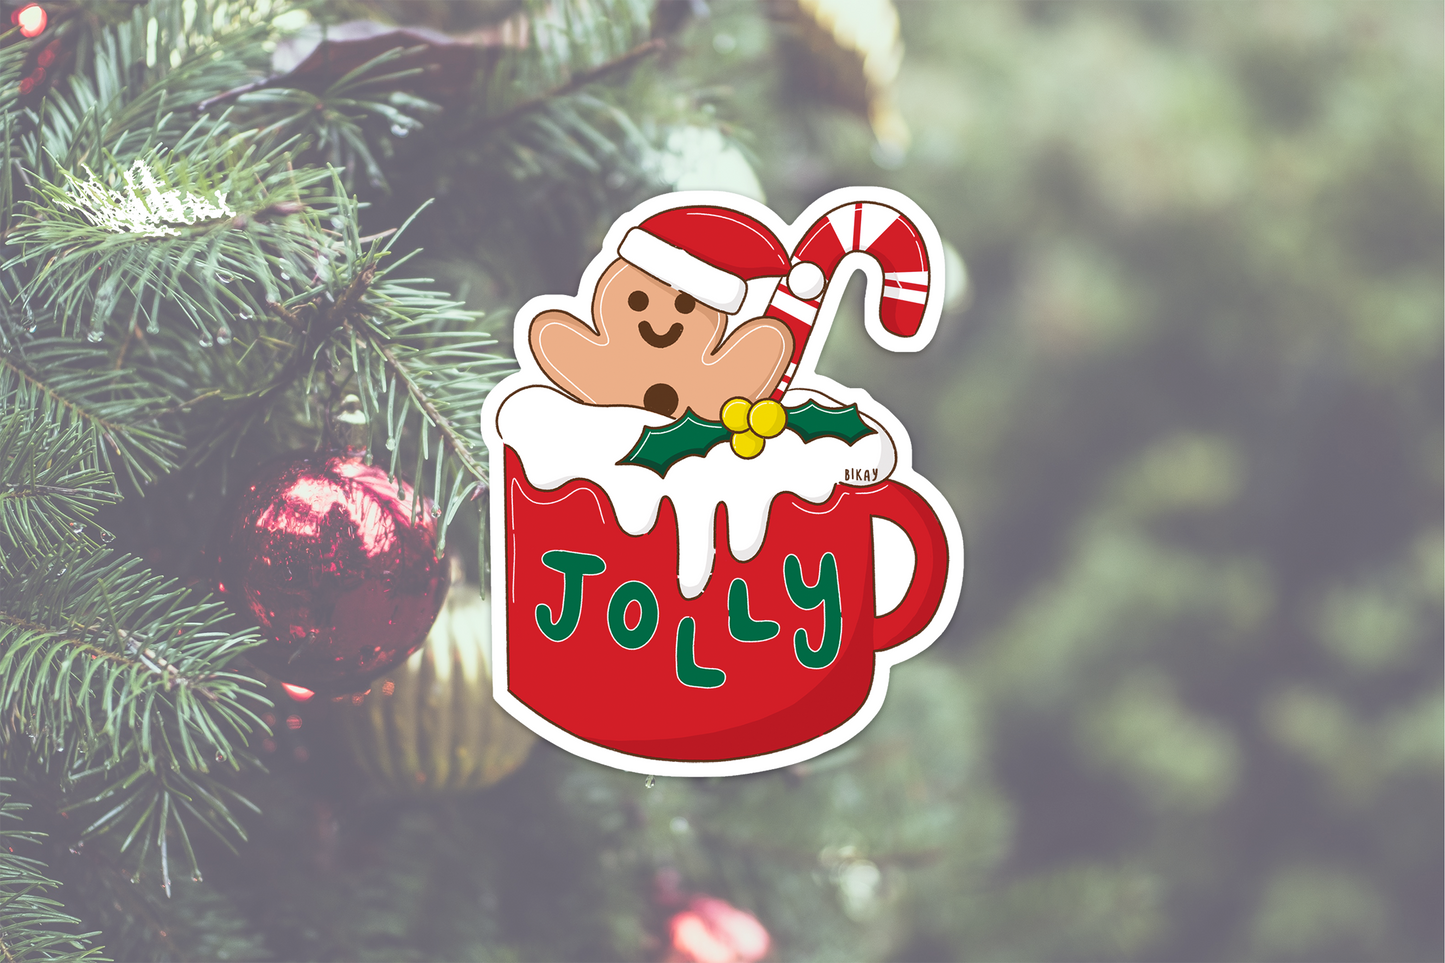 Gingerbread Man and Candy Cane Vinyl Sticker